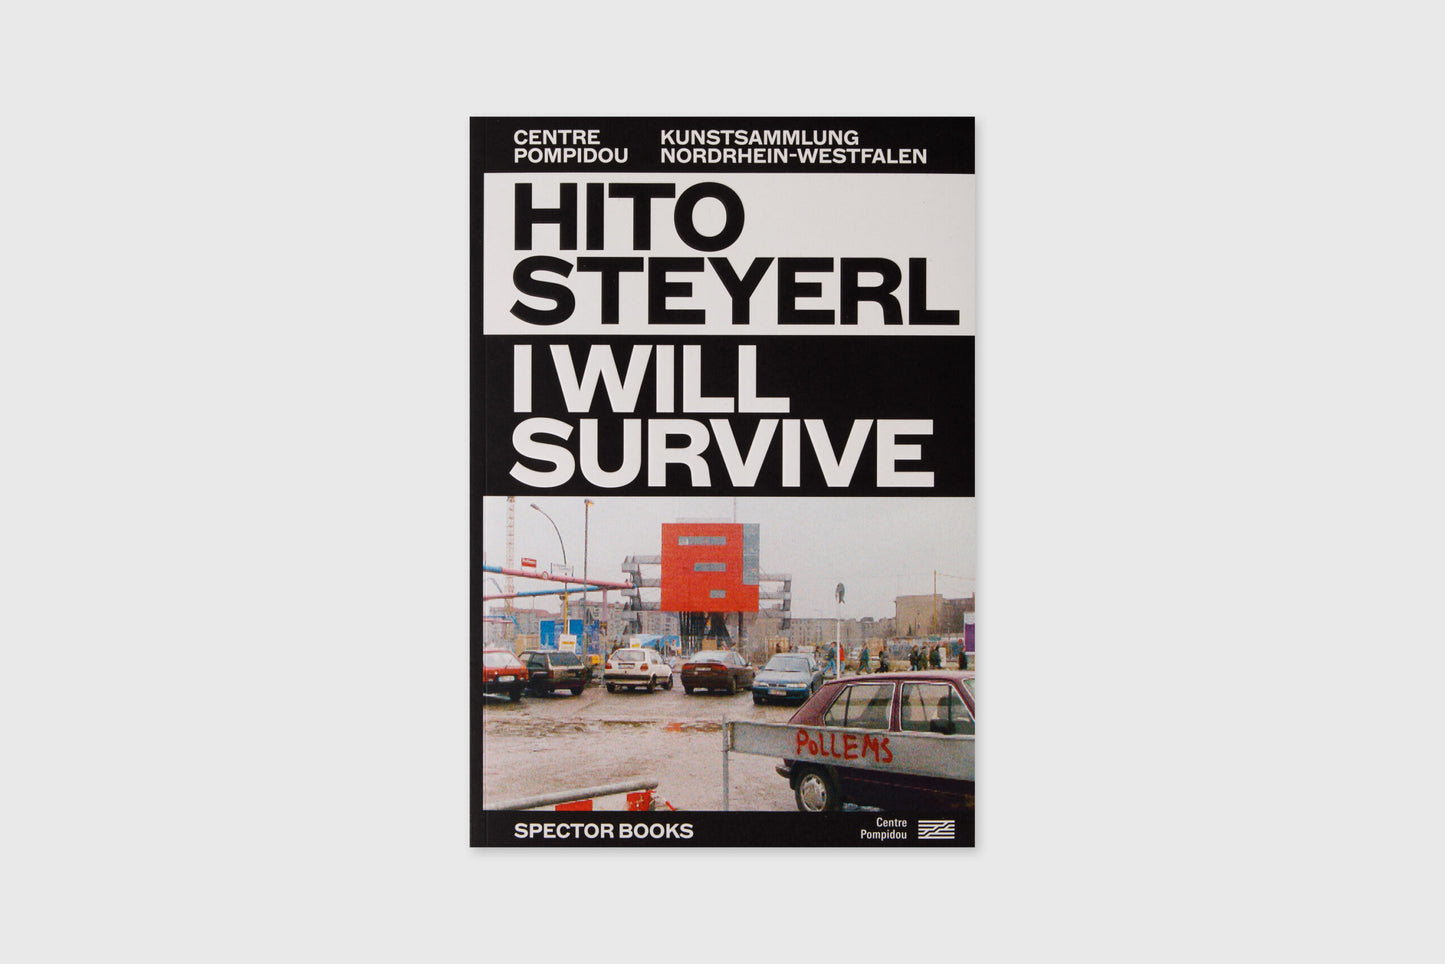 I will survive (English, French)